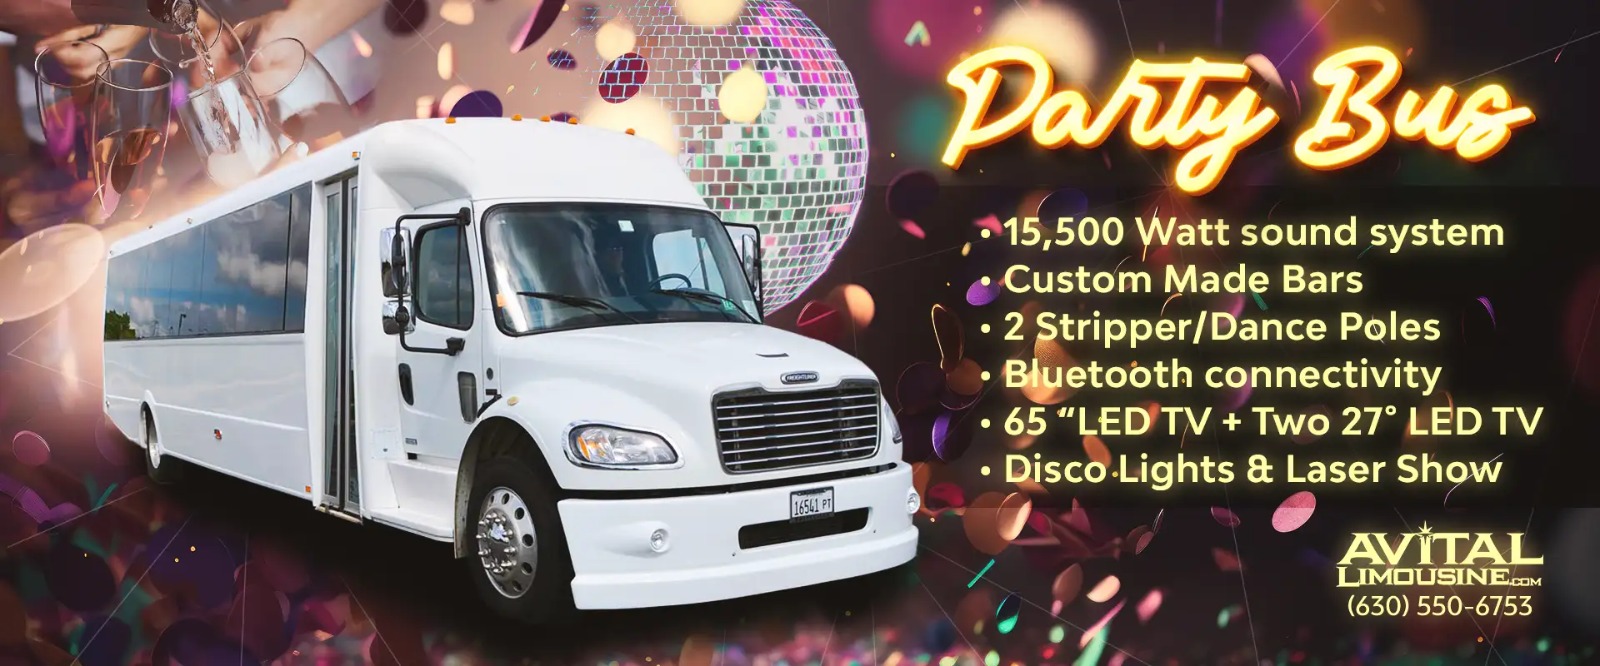 chicago weddings party bus